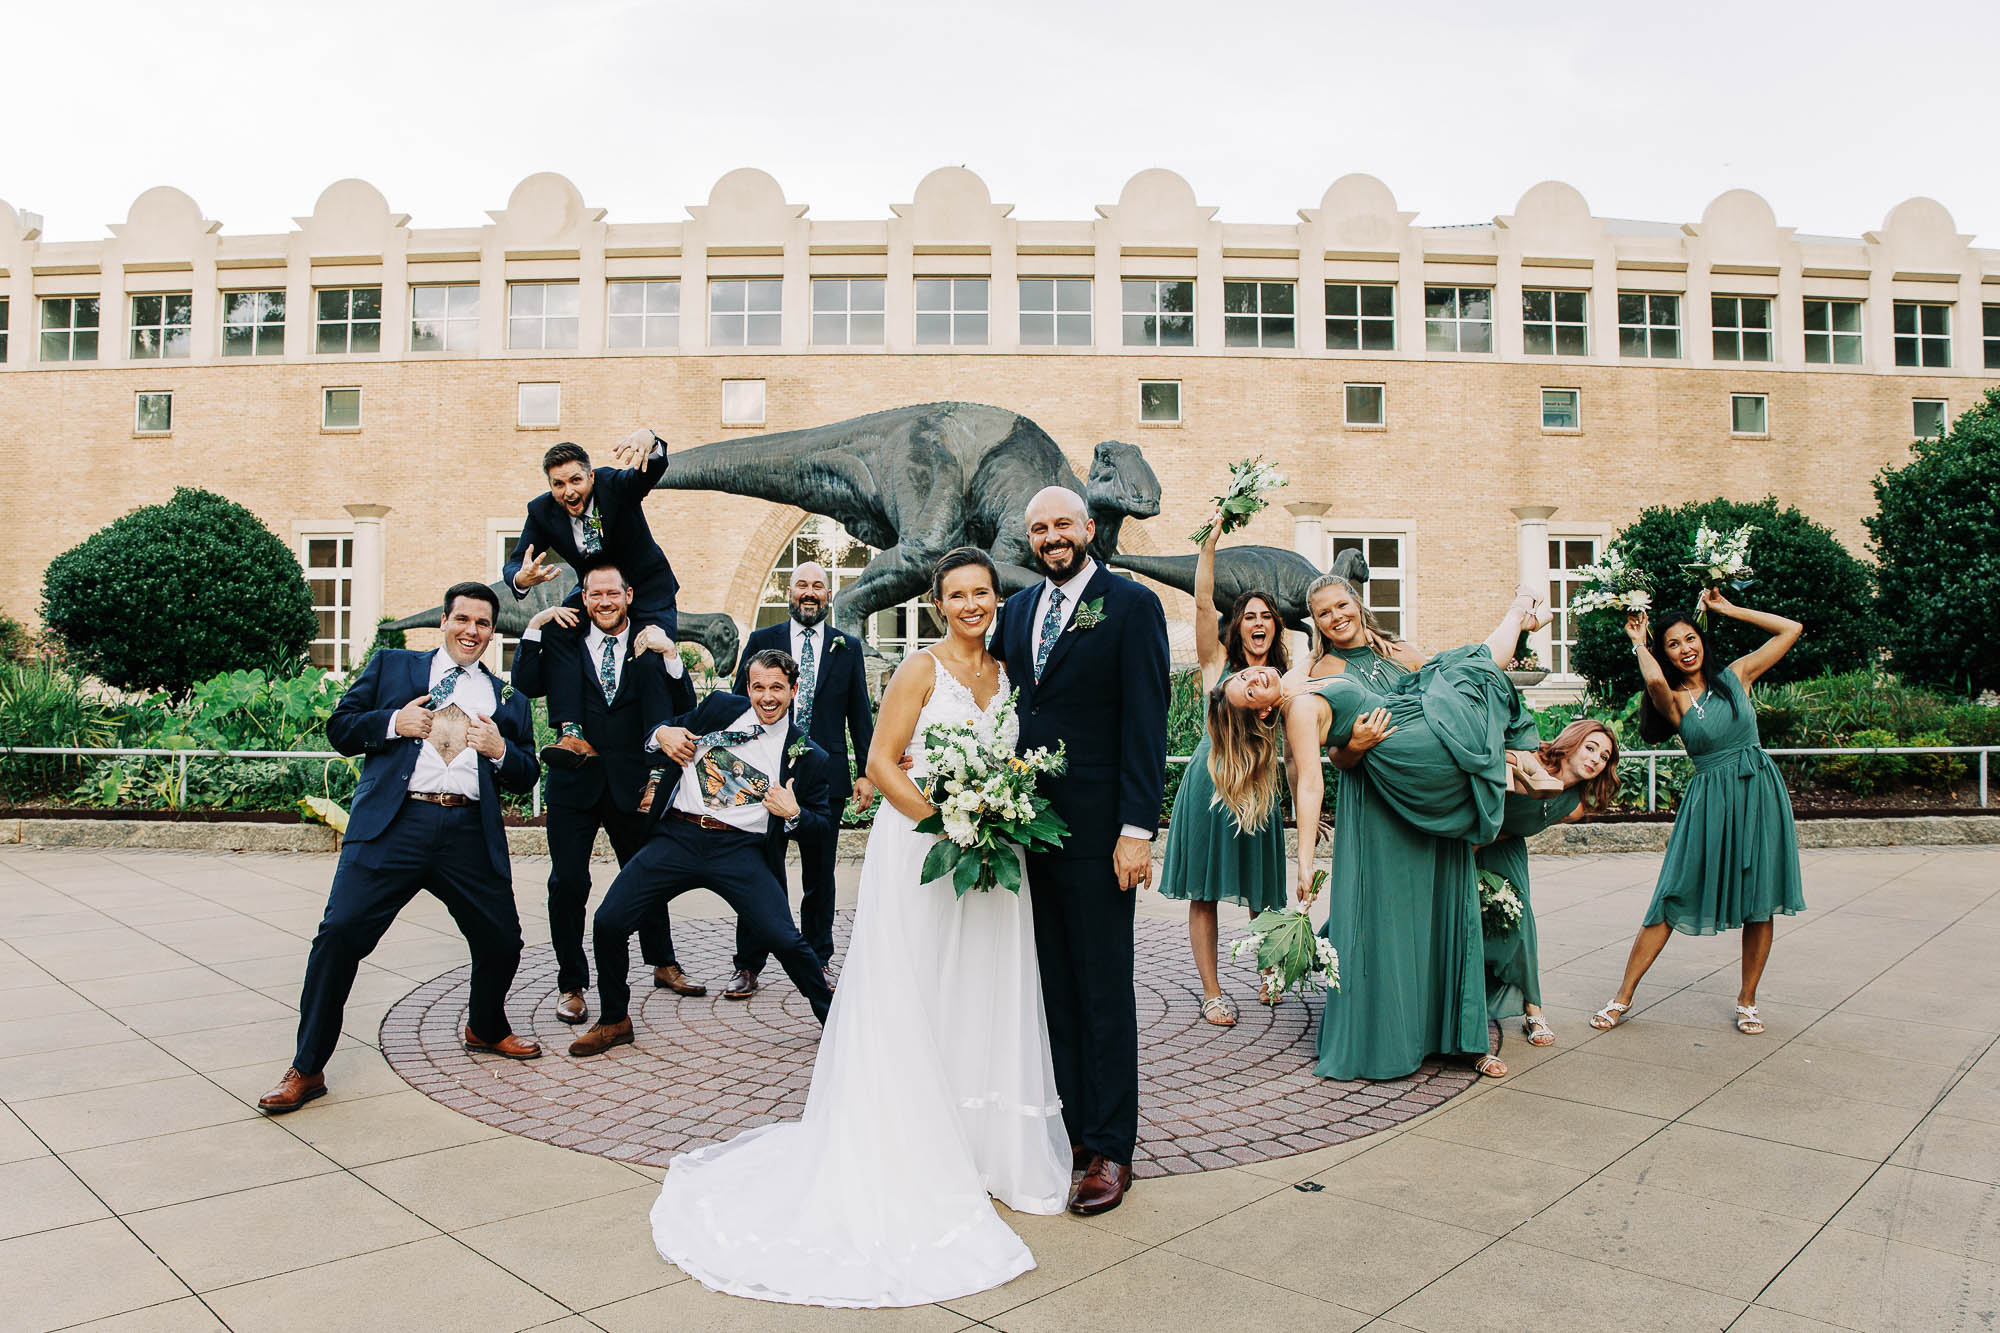 A silly photo of a wedding party and a bride and groom standing in front of Fern Bank museum with the dinosaur sculpture behind them